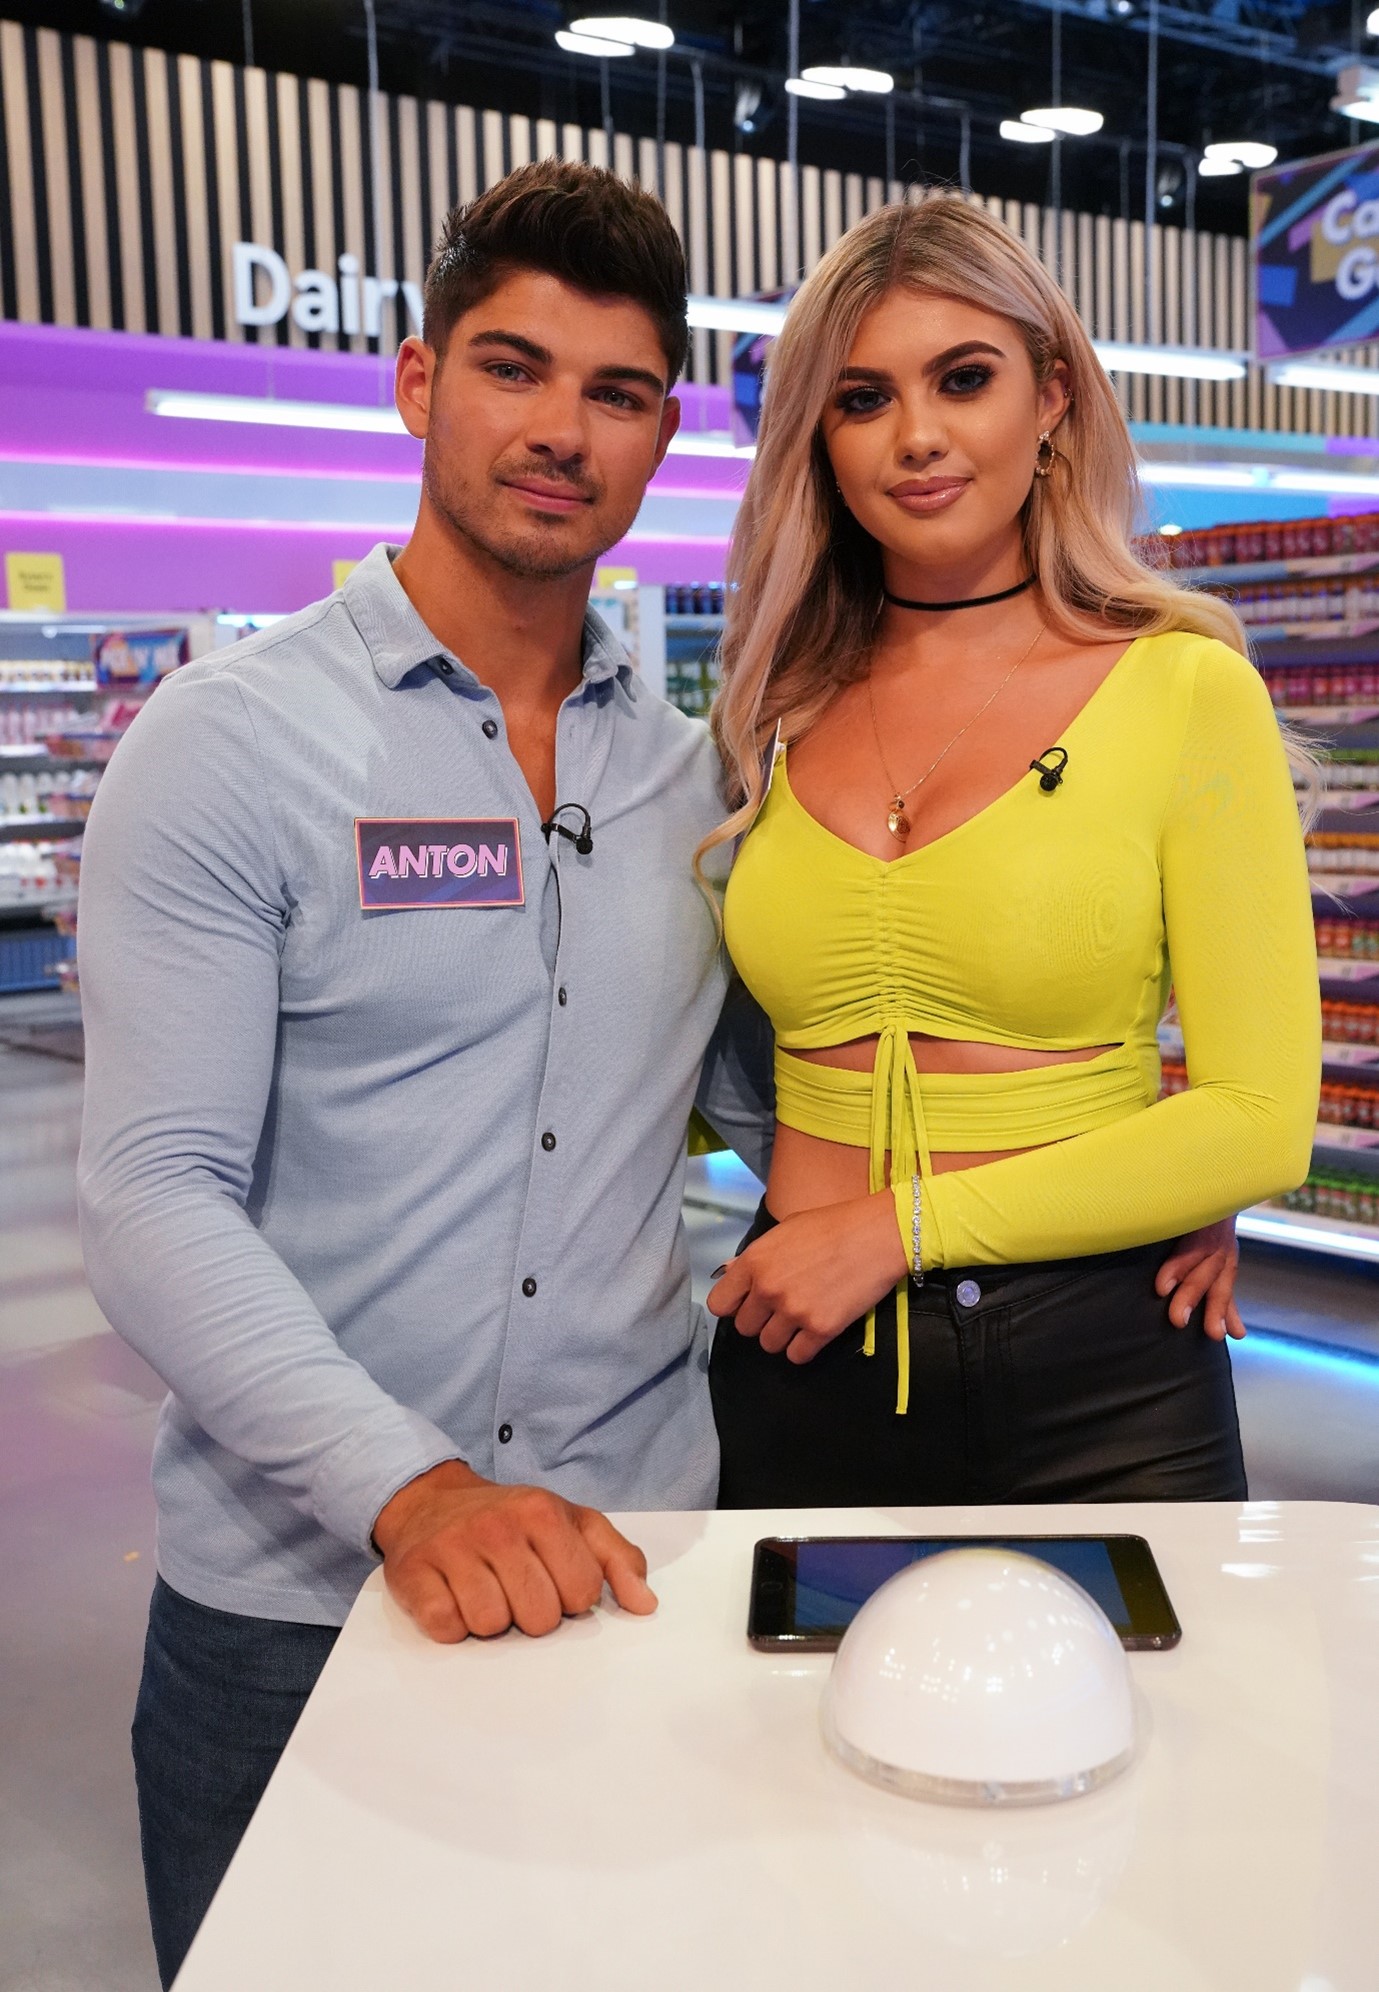 Belle Hassan and Anton Danyluk star in a Love Island edition of Supermarket Sweep.